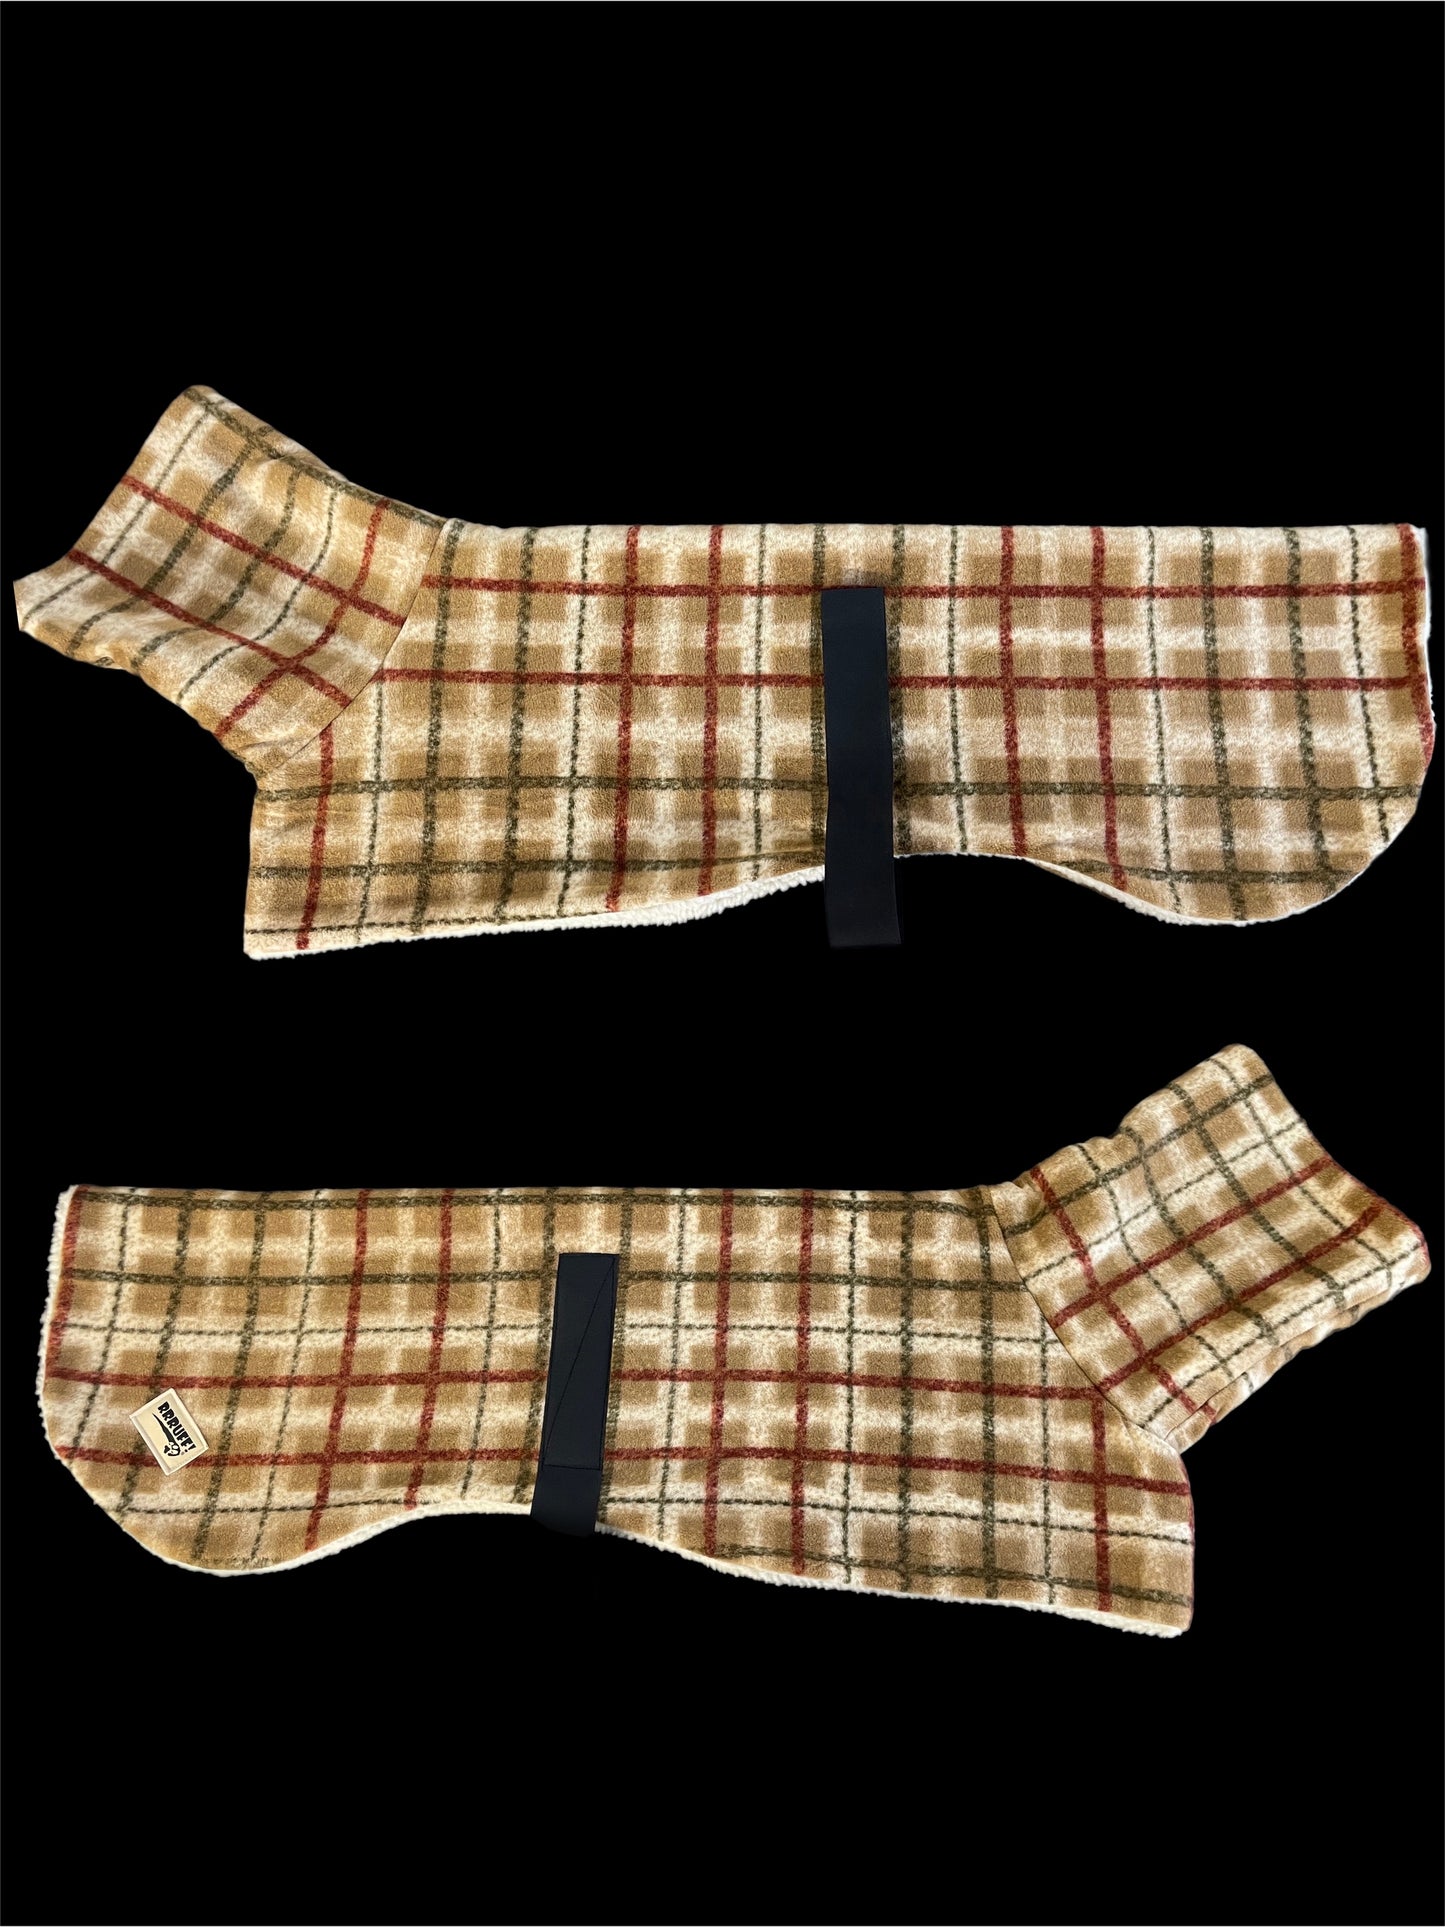 Tan Lumberjack Greyhound coat in deluxe style rug flanno check polar fleece washable extra wide neck